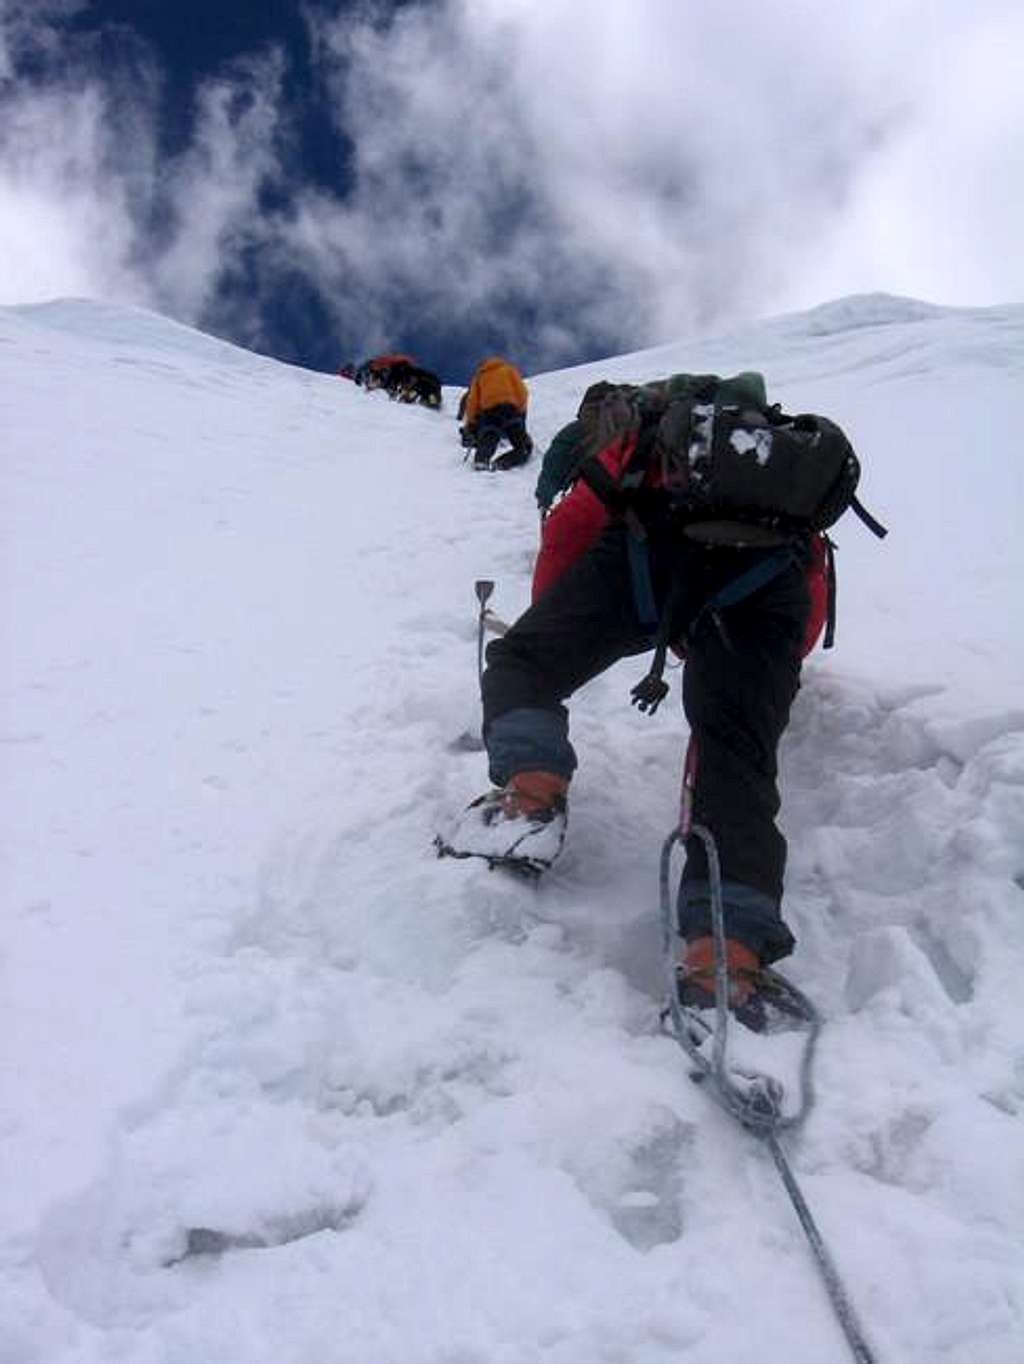 Climbing to get to the summit...